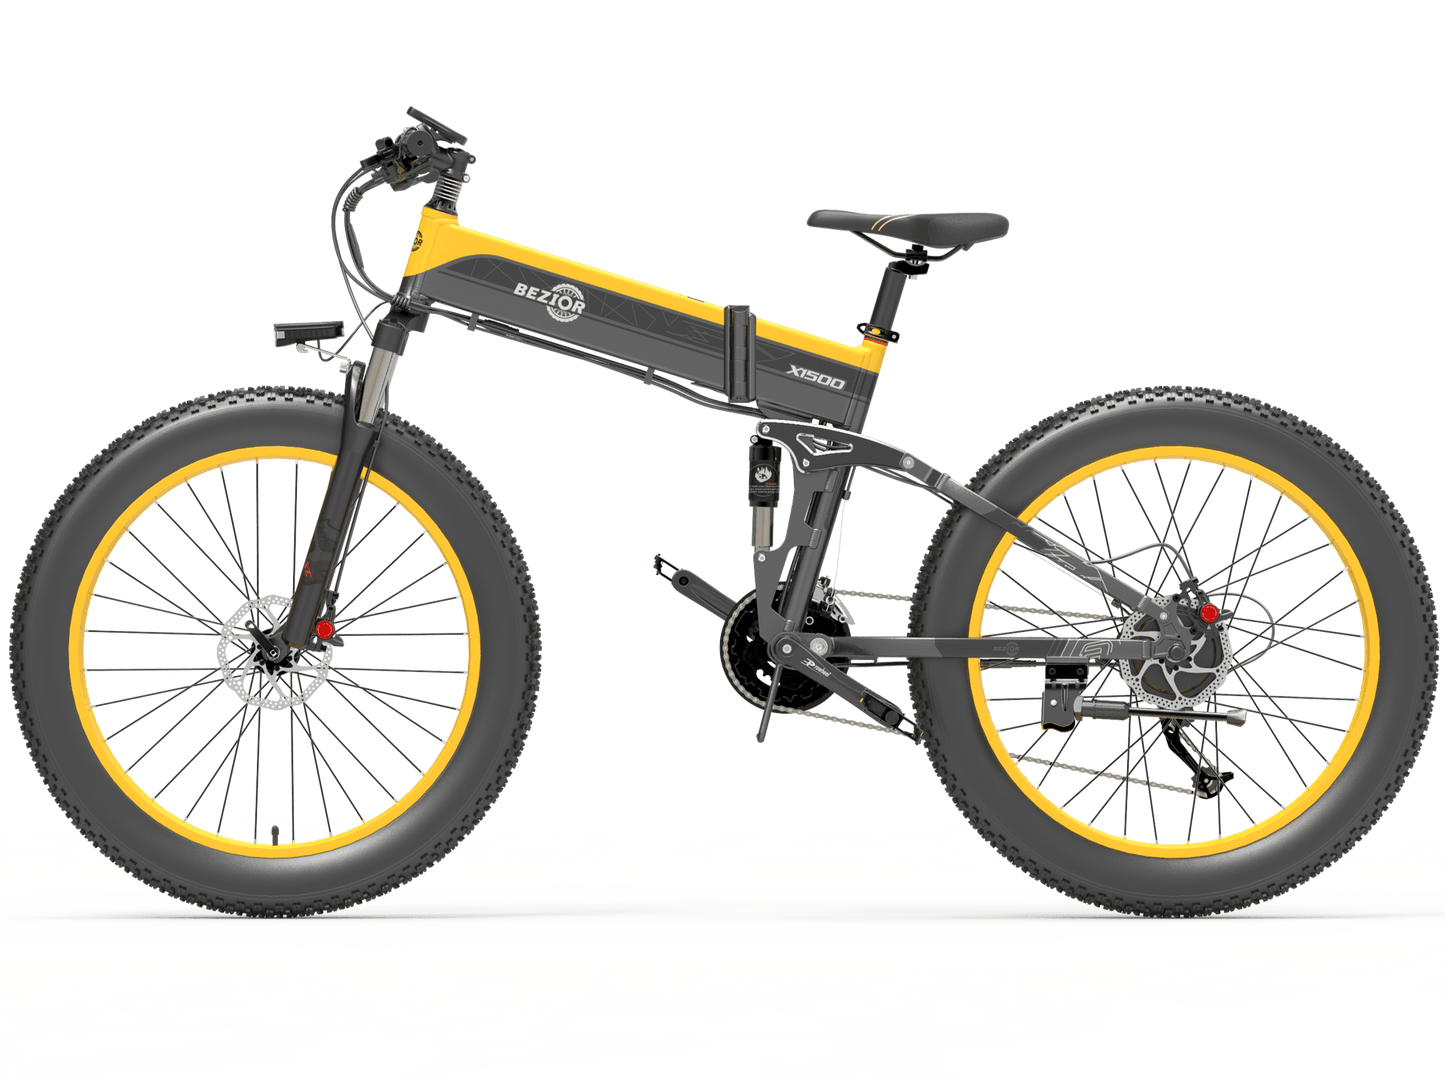 Bezior X1500 Folding Electric Mountain Bike_Preorder - Pogo Cycles available in cycle to work